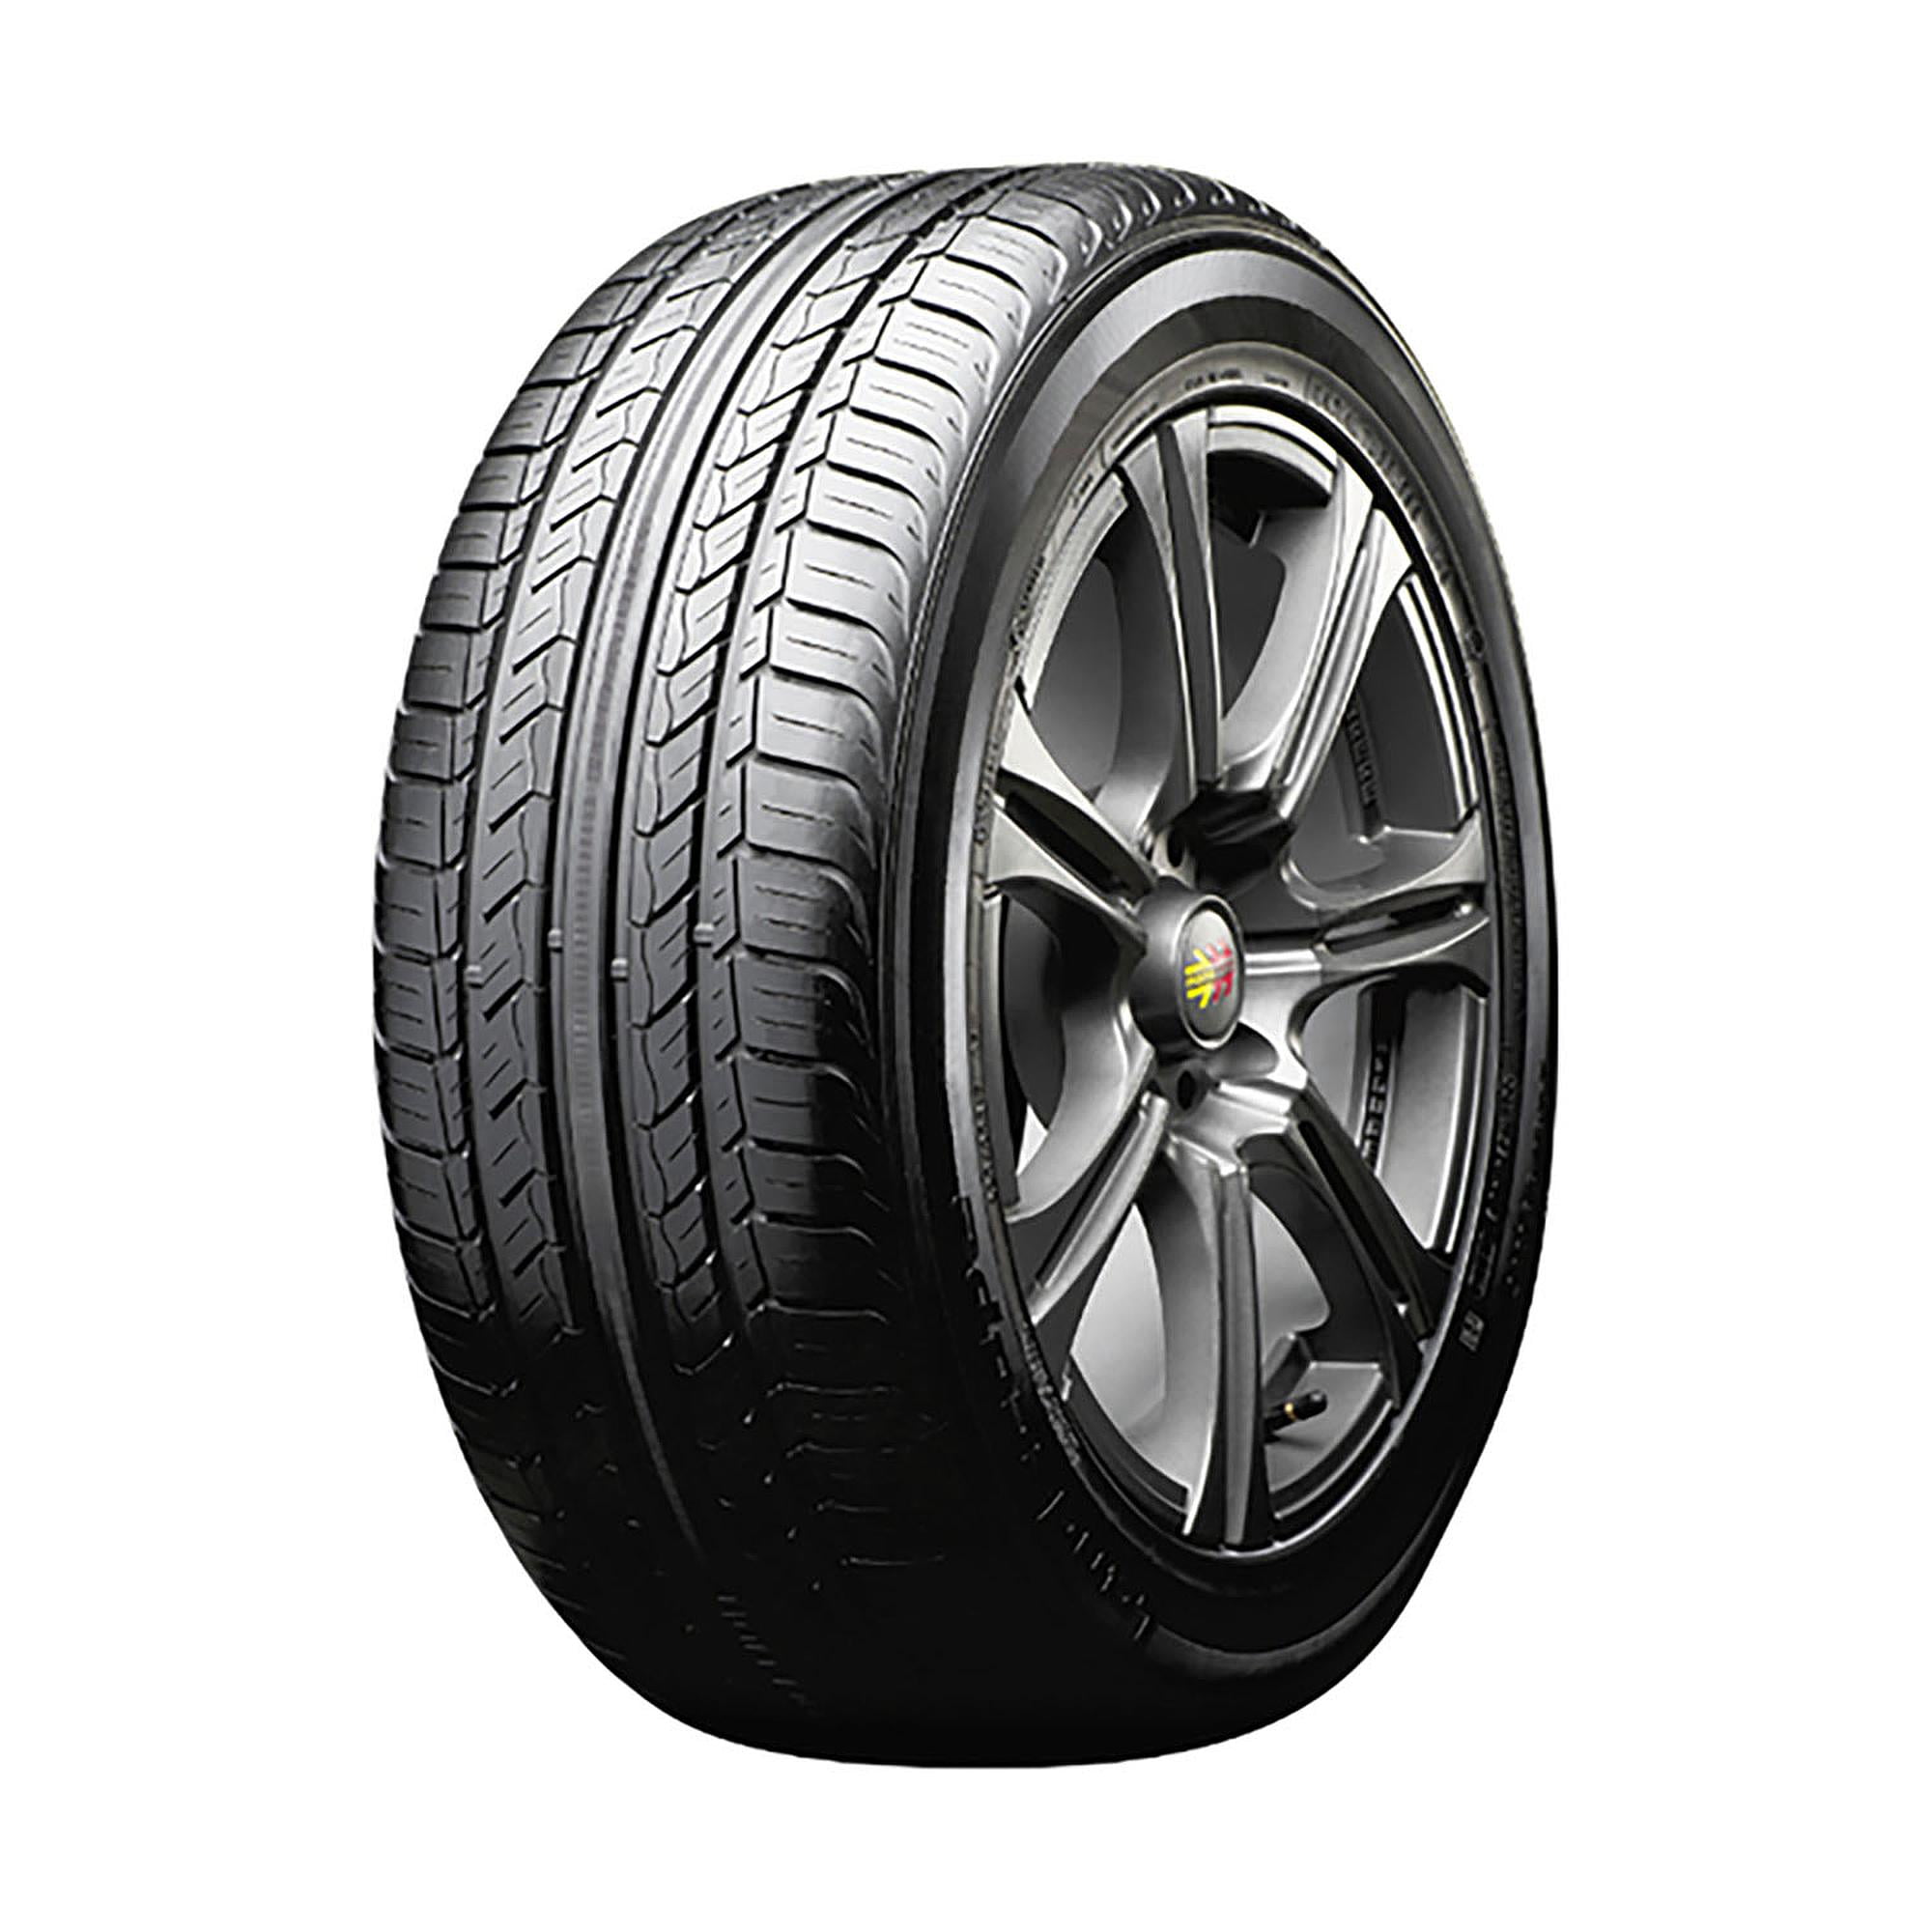 Continental ContiProContact 205/50R17 89V BSW Tire Season All